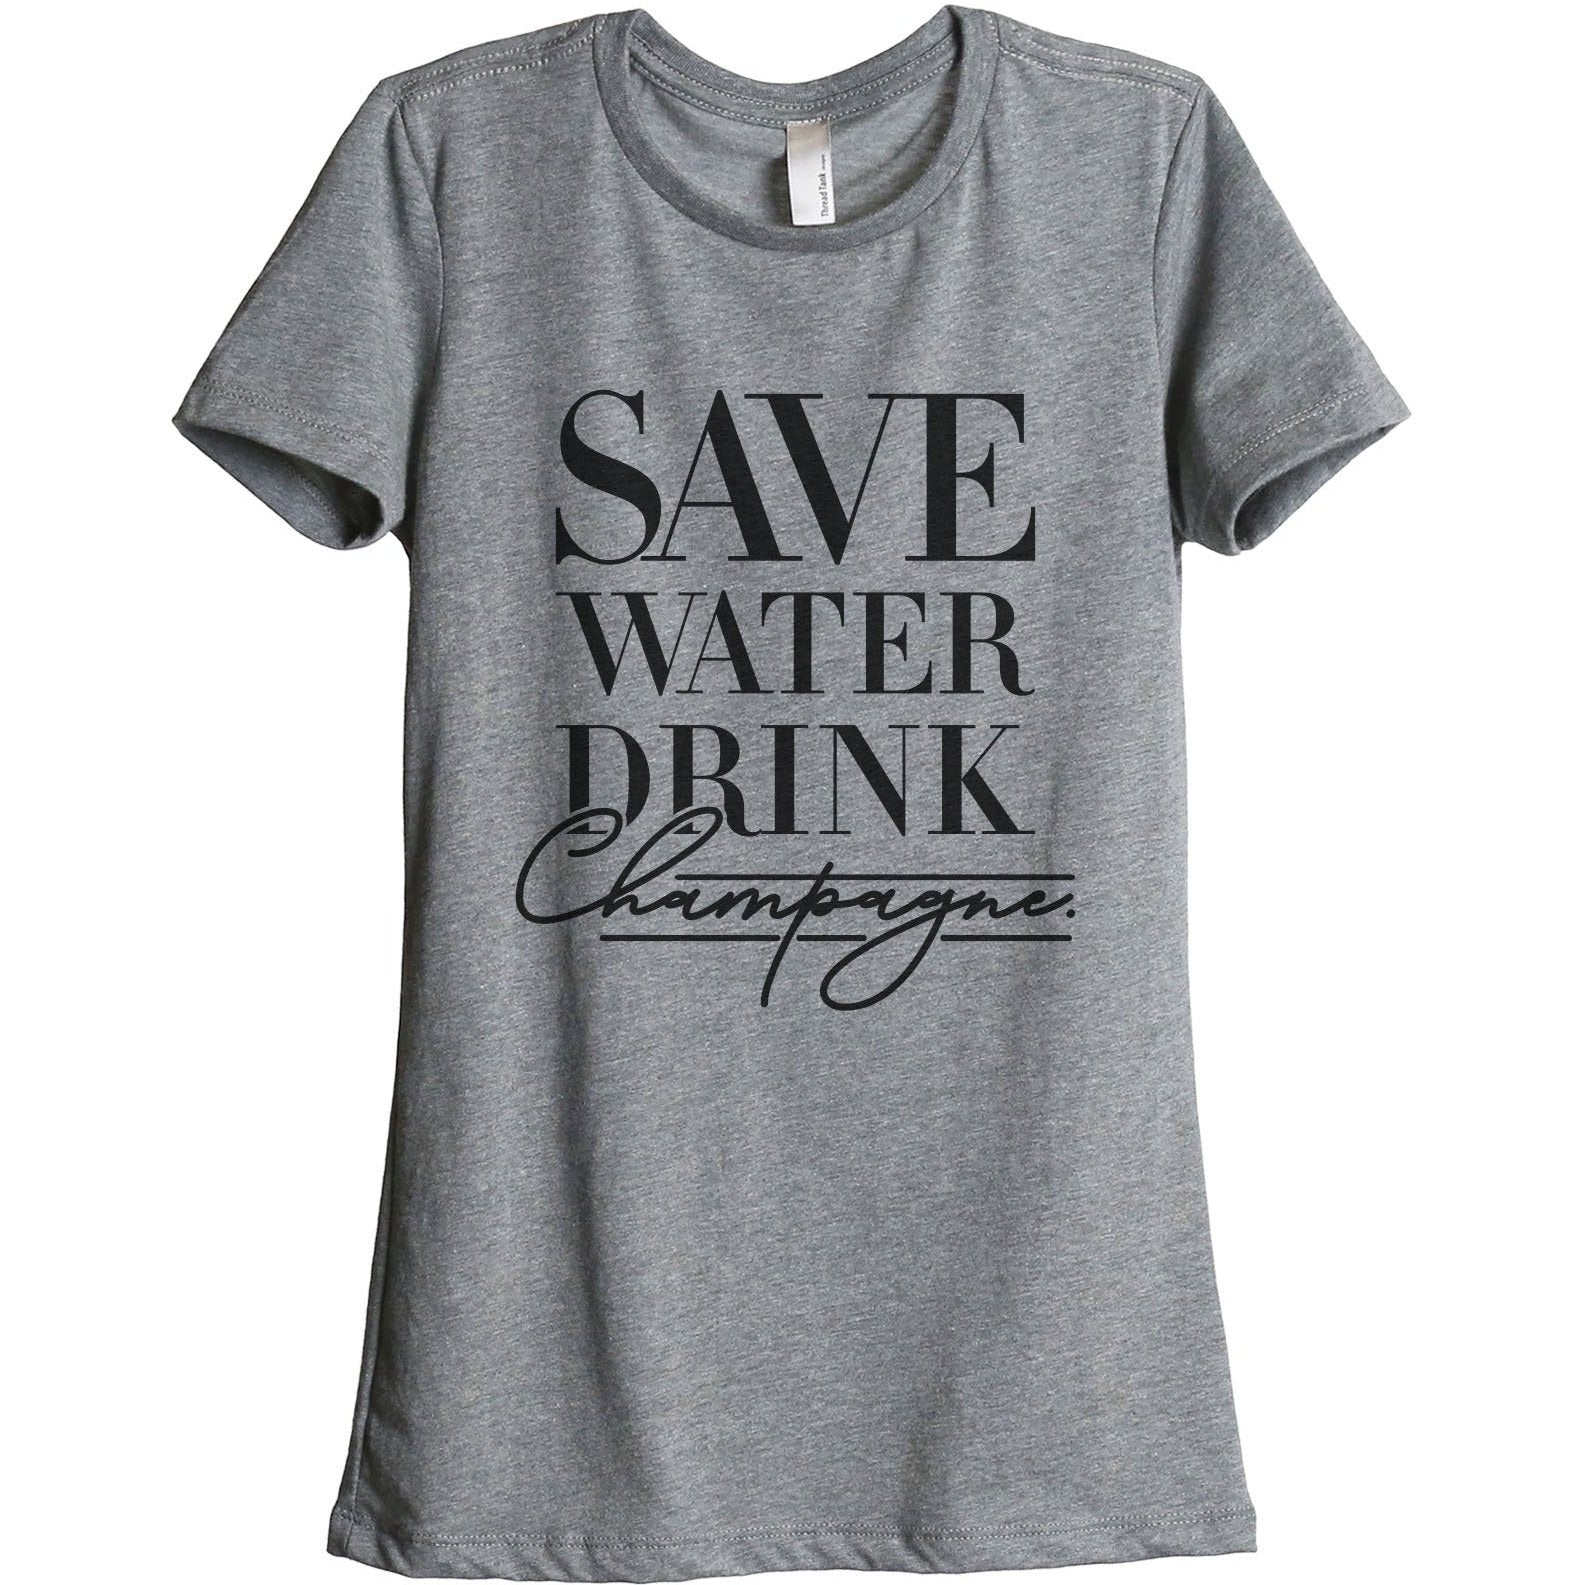 Save Water Drink Champagne Women's Relaxed Crewneck T-Shirt Top Tee Heather Grey